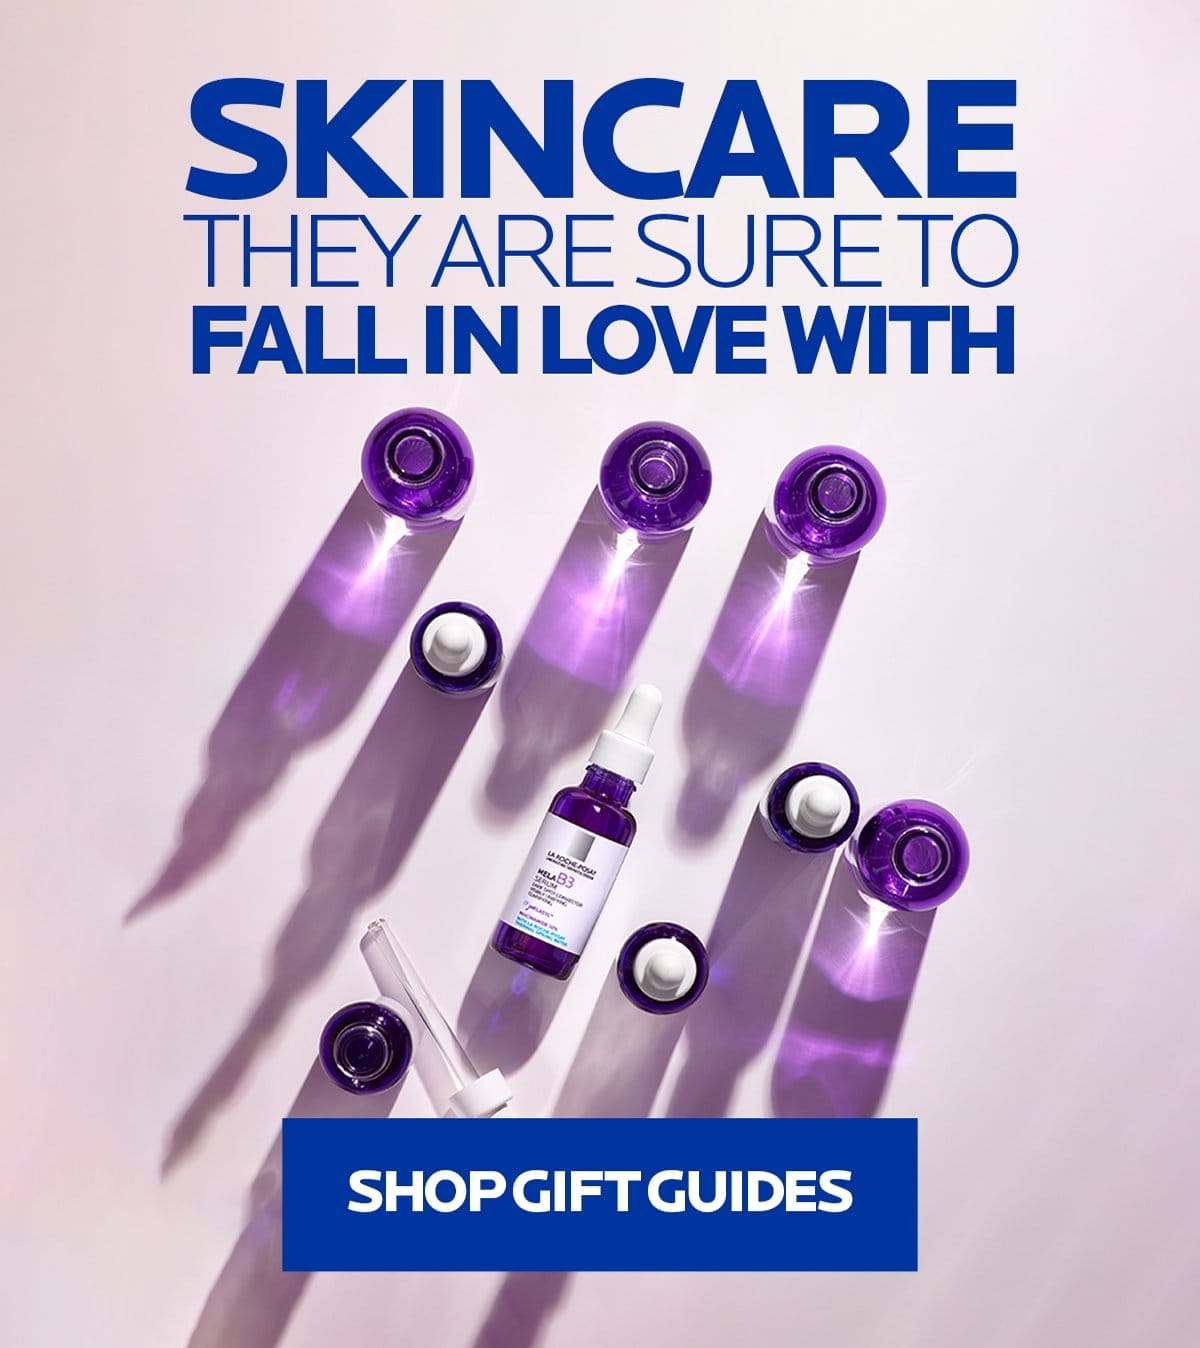 SHOP GIFT GUIDES FOR VALENTINES DAY